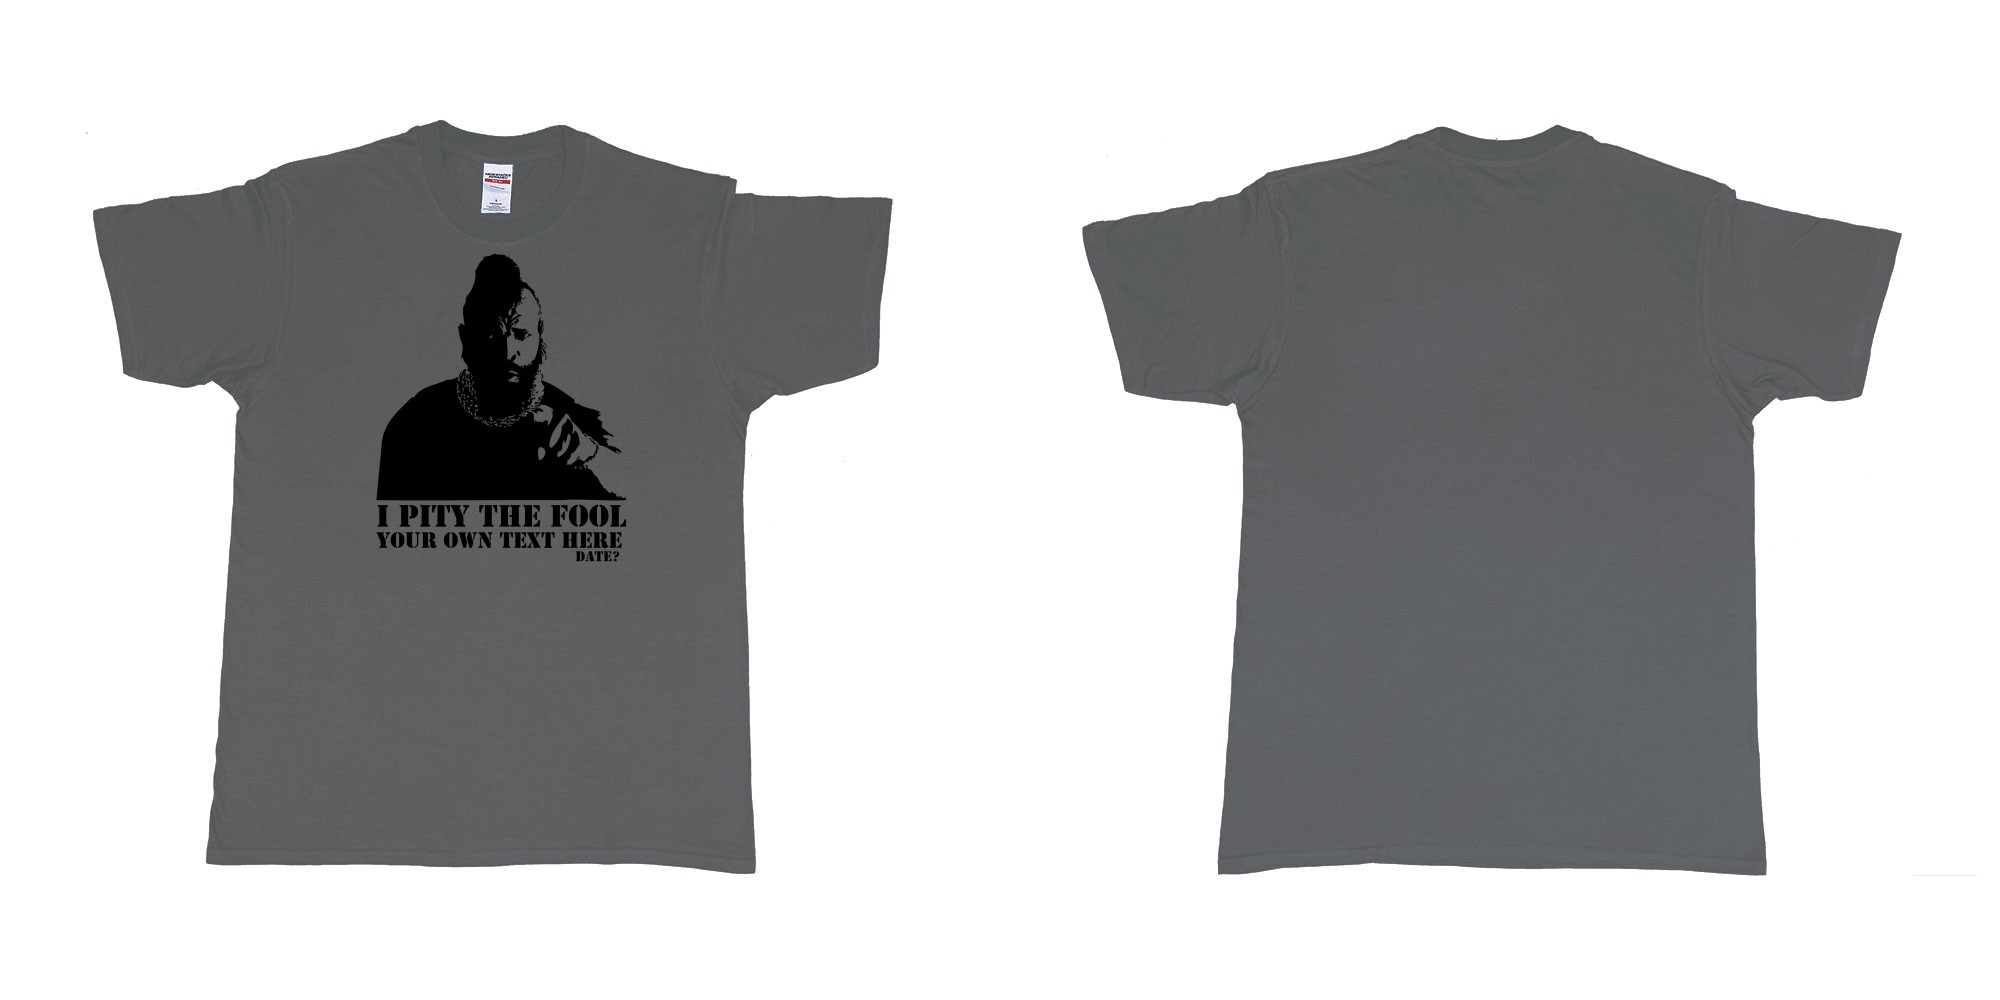 Custom tshirt design I pity the fool in fabric color charcoal choice your own text made in Bali by The Pirate Way